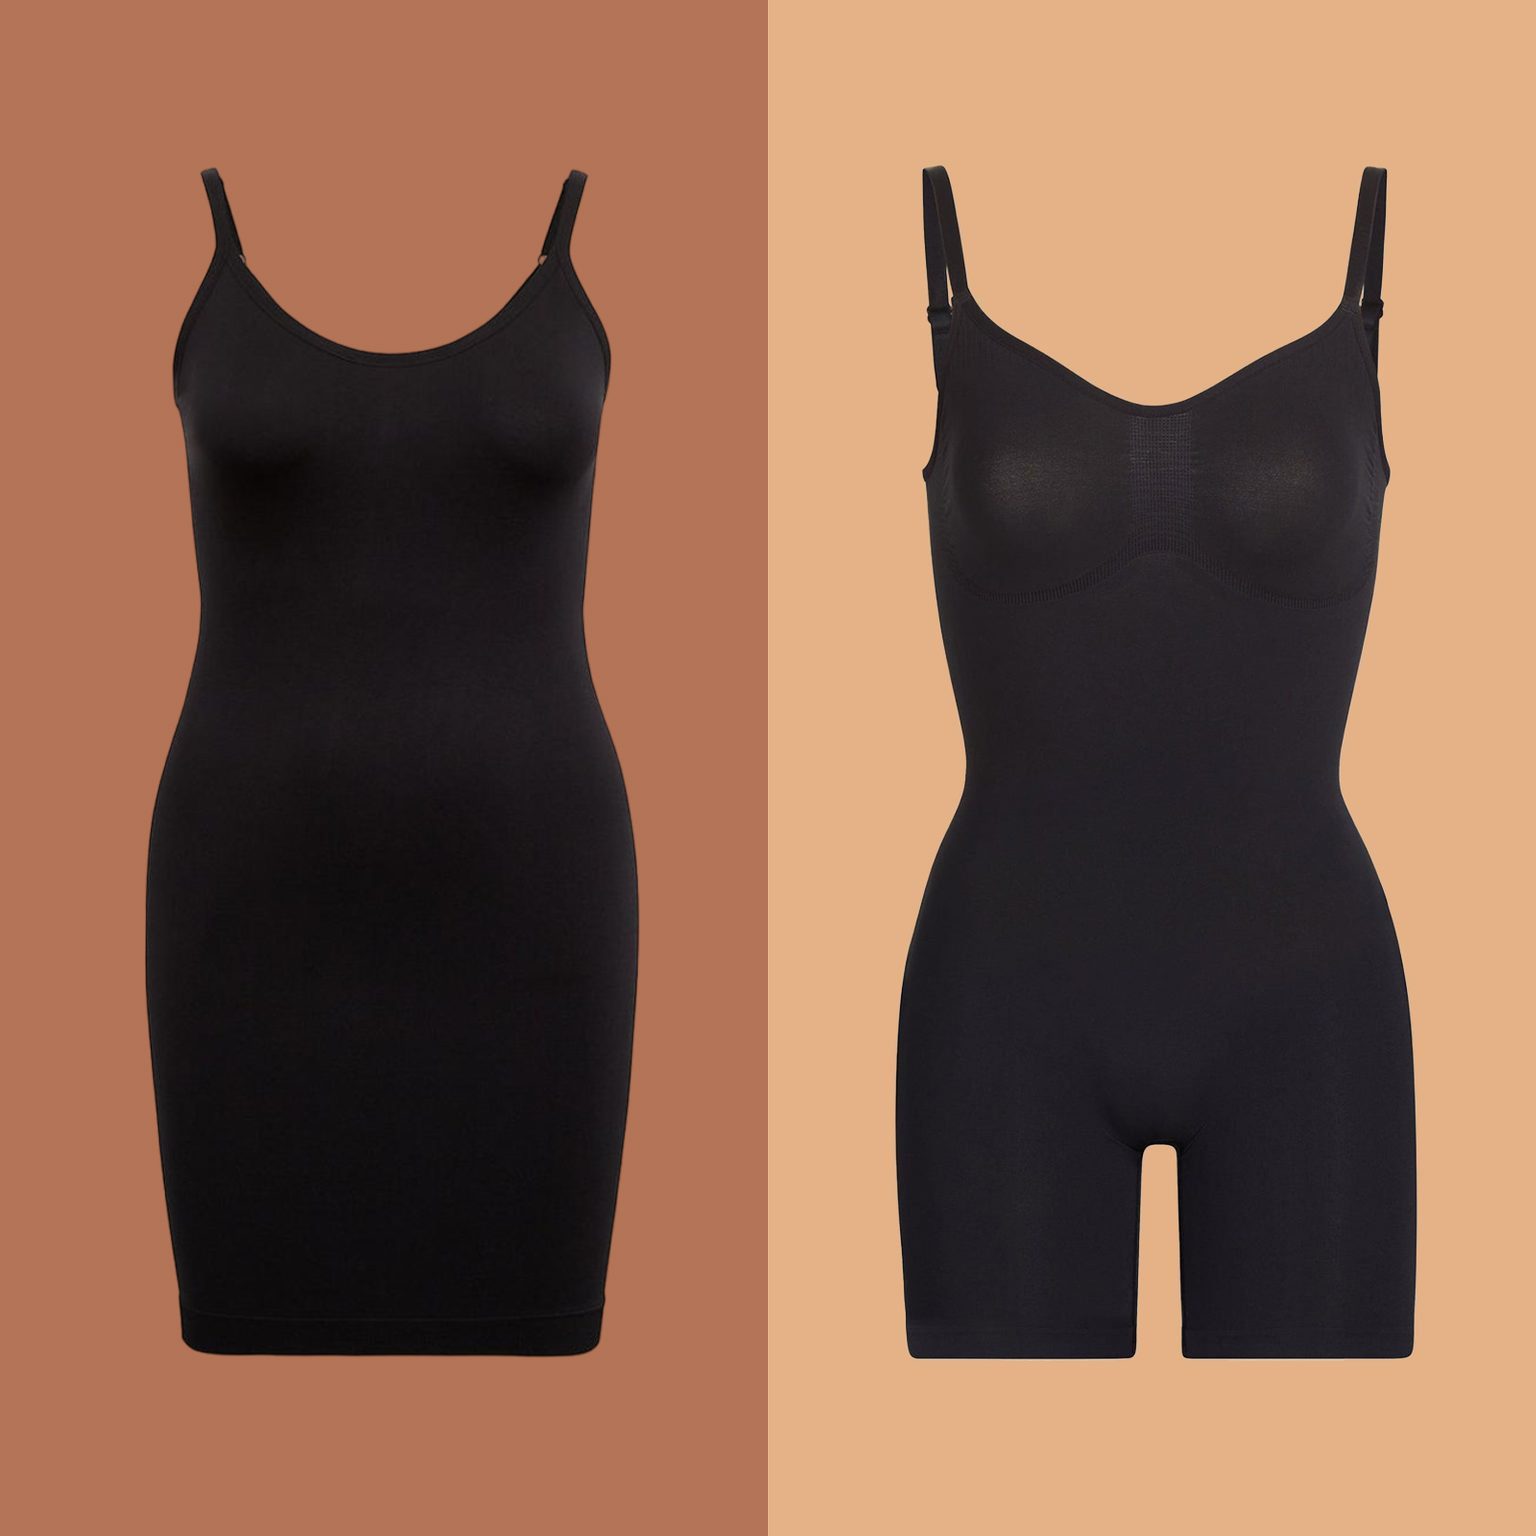 SKIMS NEW SHAPEWEAR REVIEW ON PLUS SIZE BODY, SIZES 3X-5X, PROS, CONS,  BEFORE & AFTER